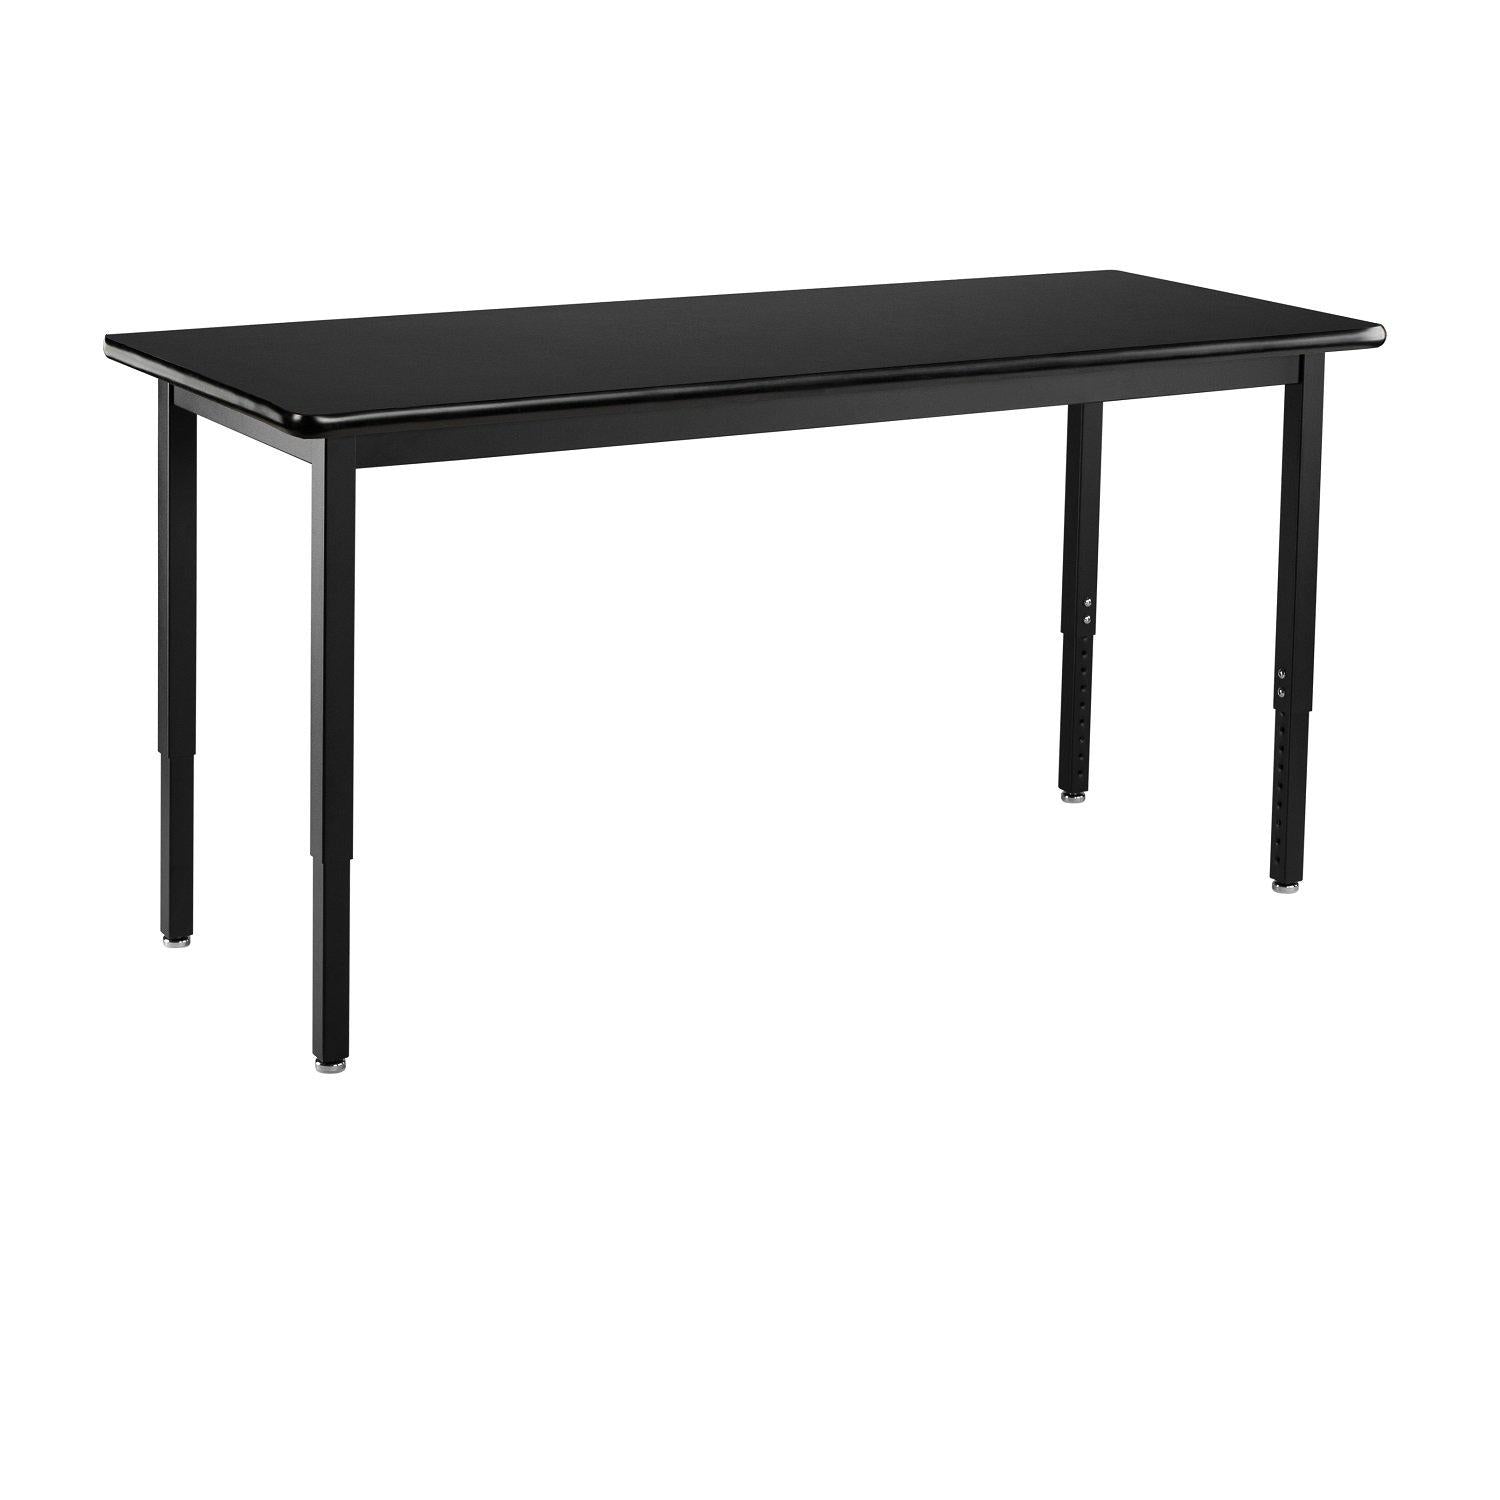 Heavy-Duty Height-Adjustable Utility Table, Black Frame, 30" x 48", High-Pressure Laminate Top with T-Mold Edge